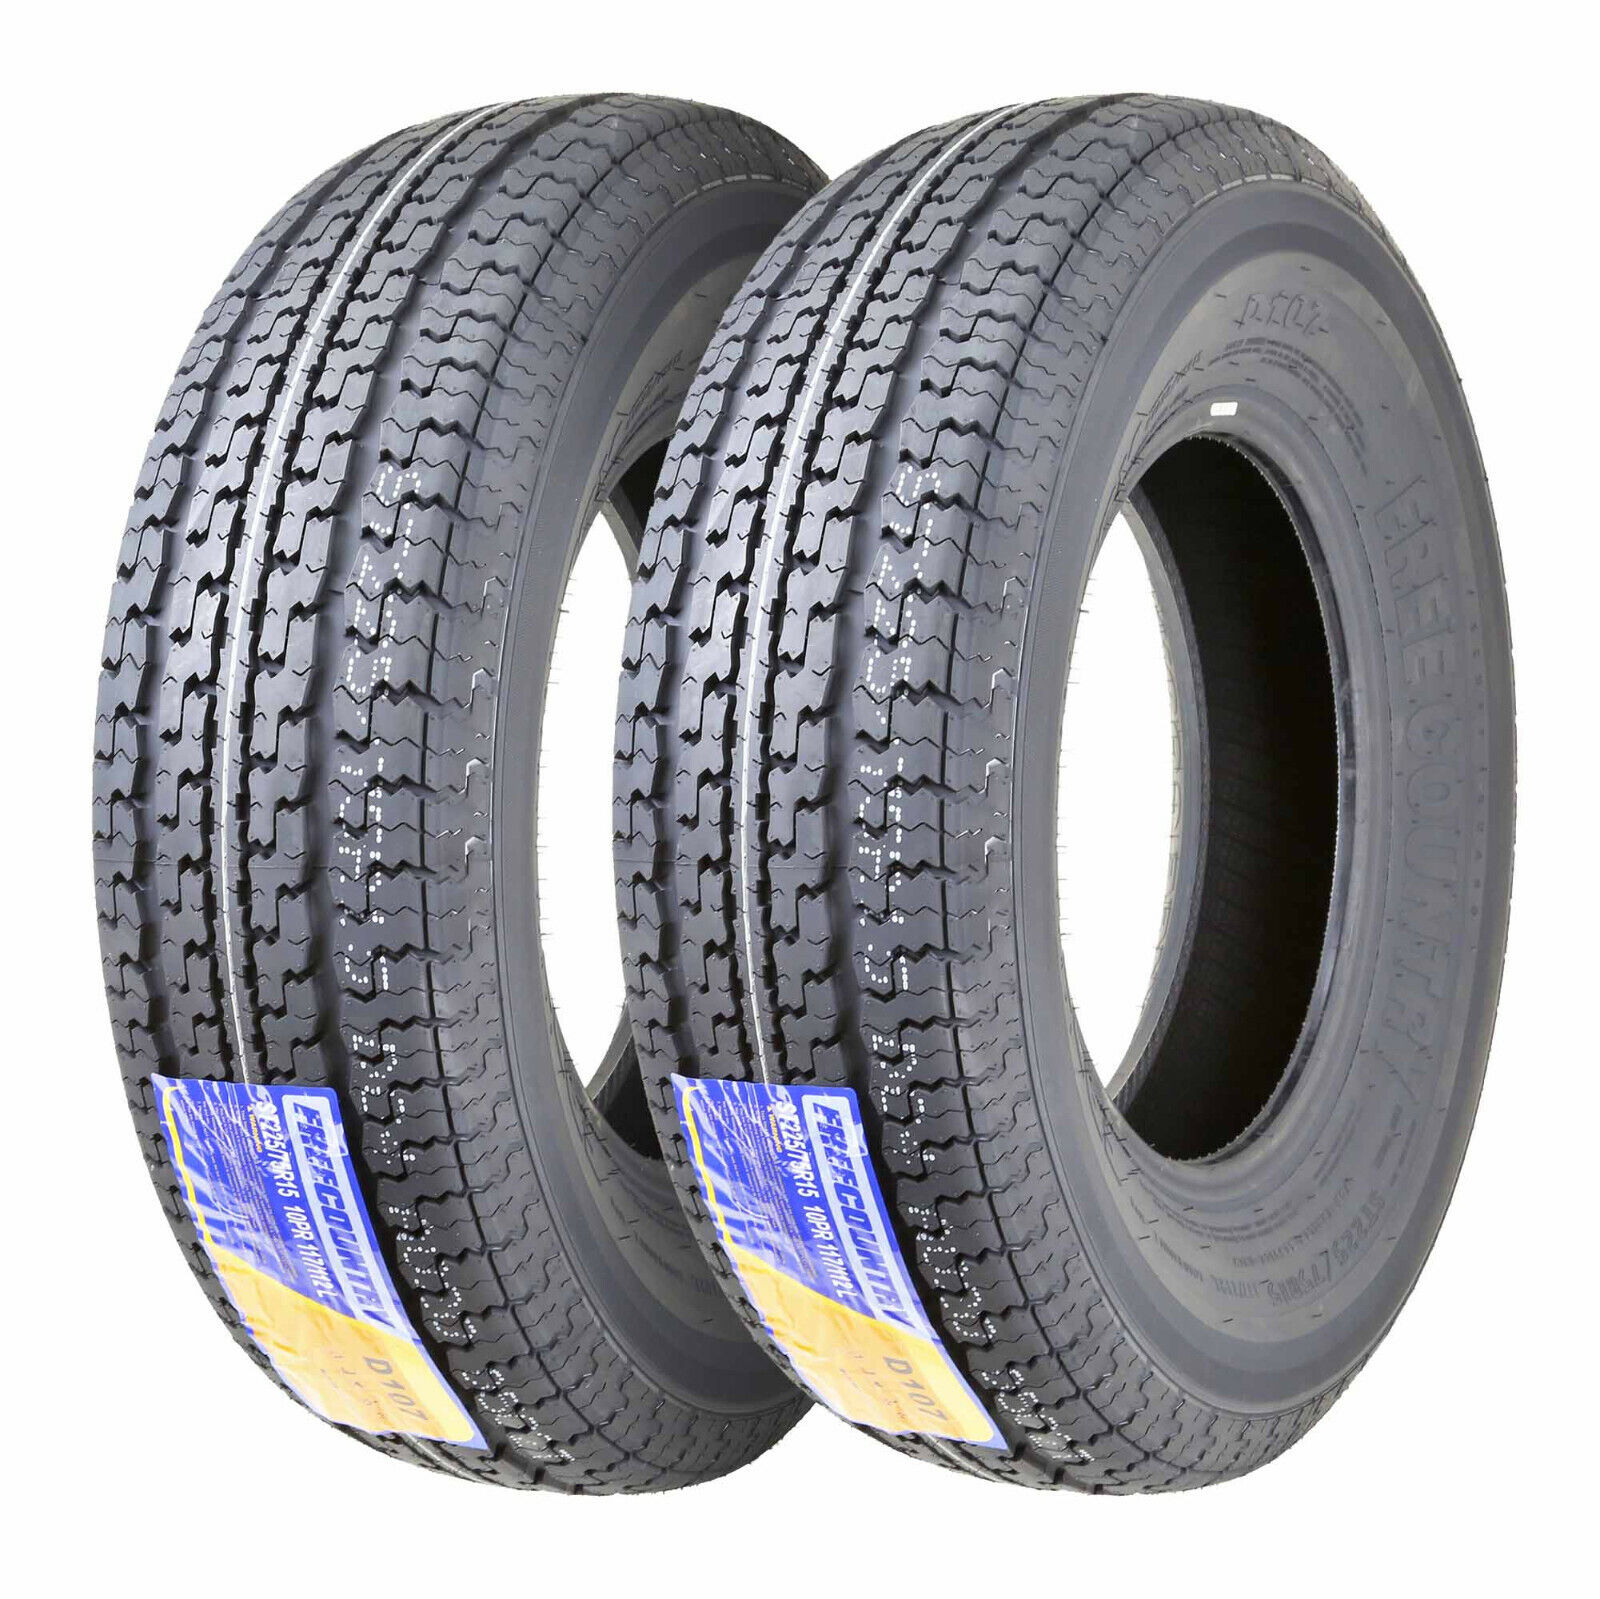 2 ST225/75R15 FREE COUNTRY Trailer Tires 225 75 15 Radial 10PR LRE w/Scuff Guard